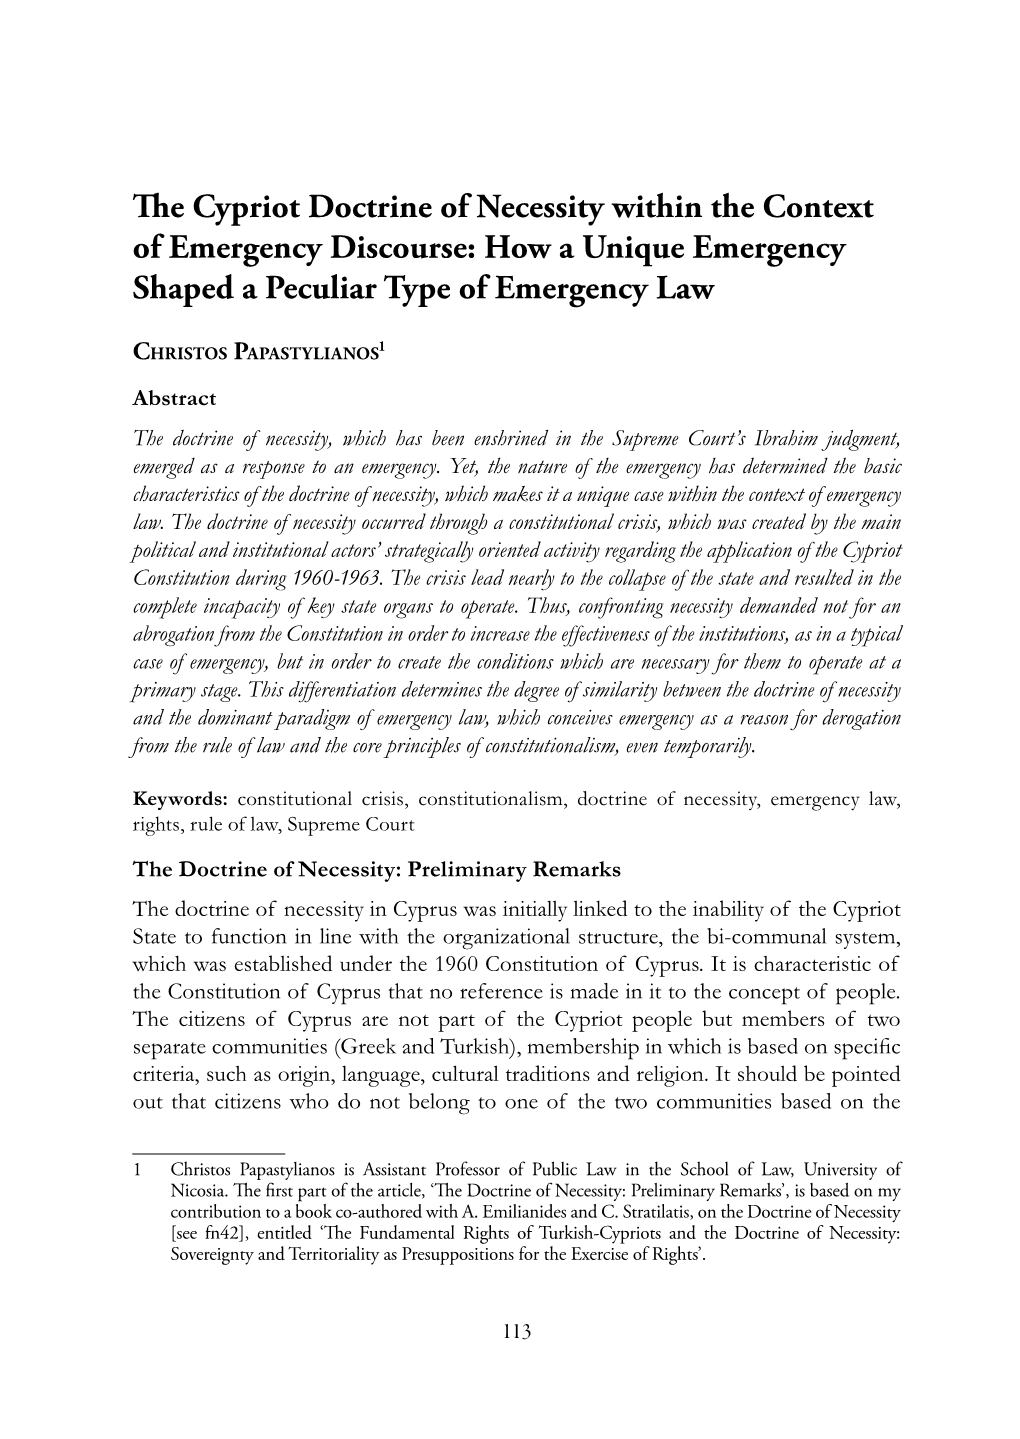 The Cypriot Doctrine of Necessity Within the Context of Emergency Discourse: How a Unique Emergency Shaped a Peculiar Type of Emergency Law